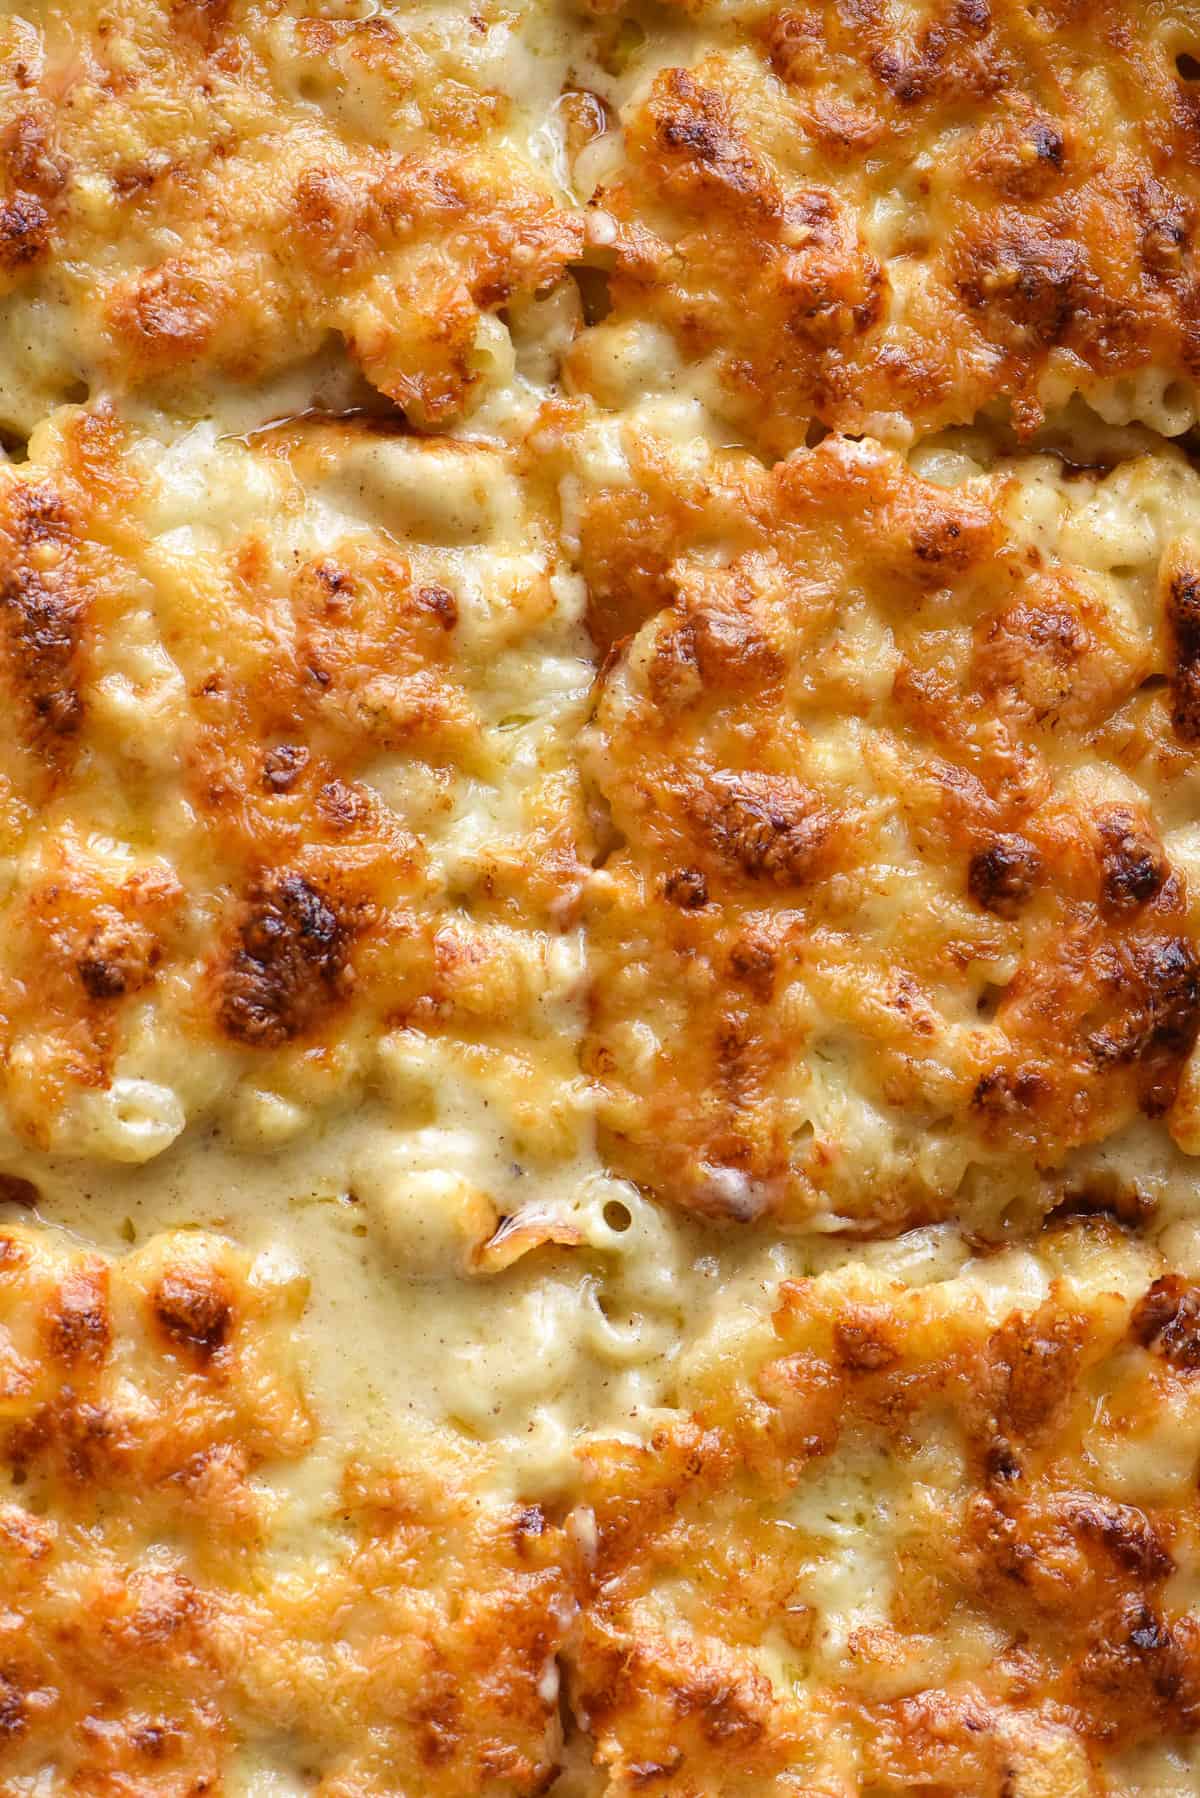 An aerial close up image of vegan gluten free mac and cheese that has been baked and has a golden brown top